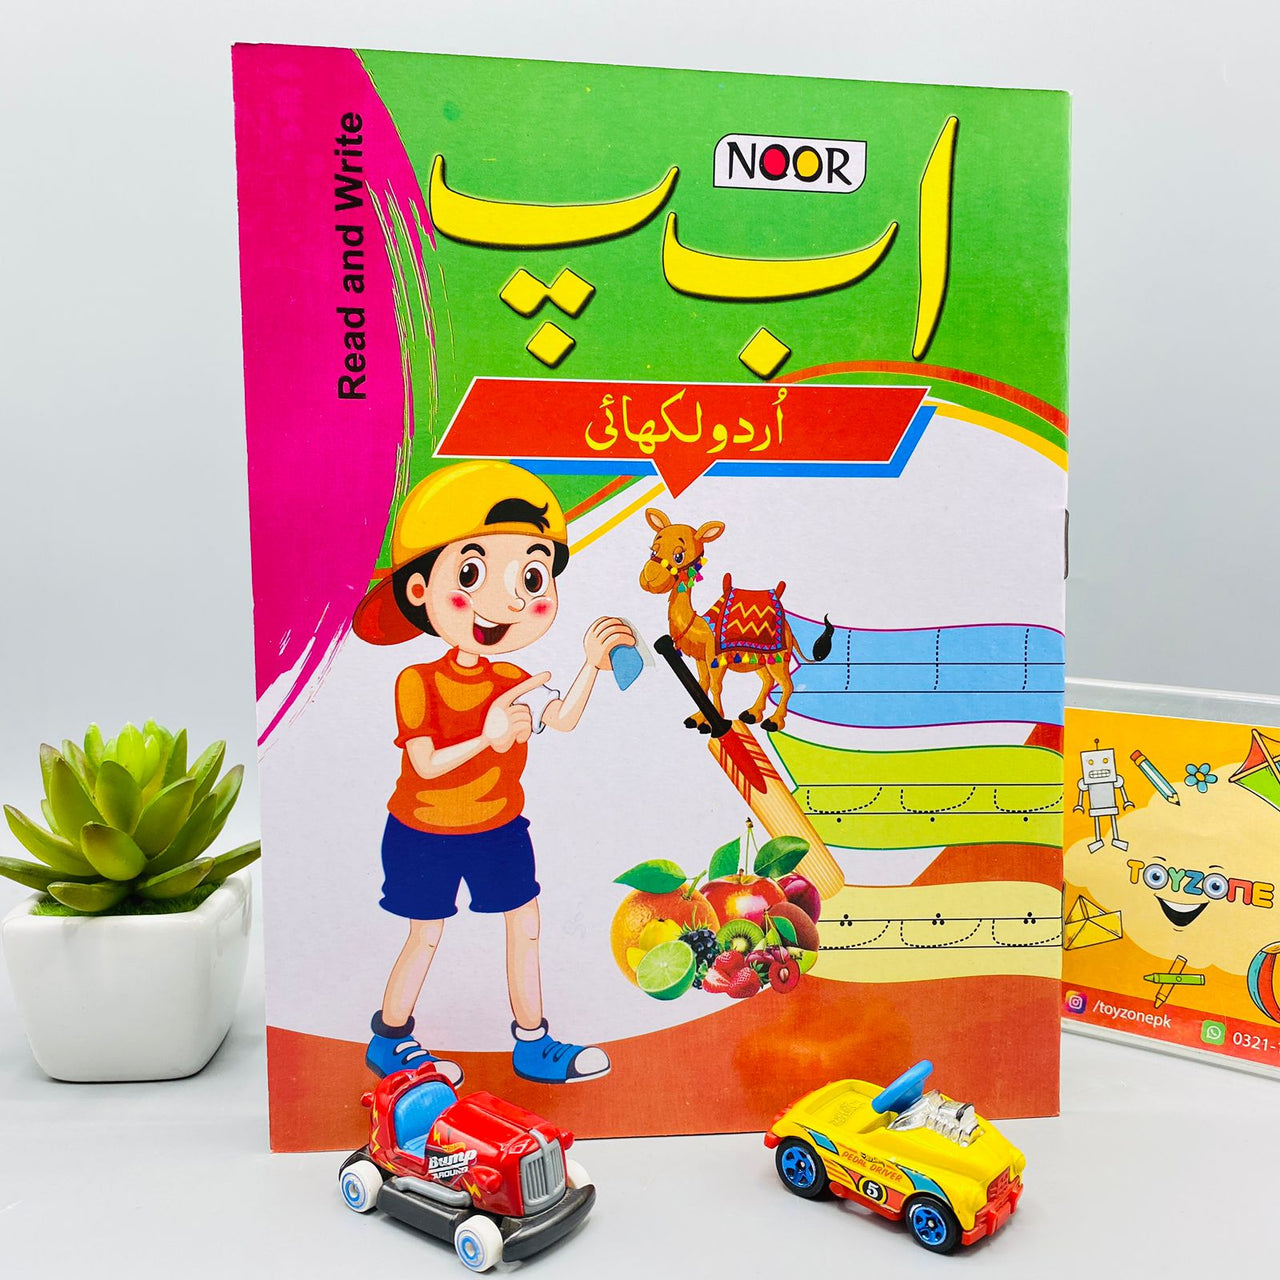 Learning Writing Book For Kids